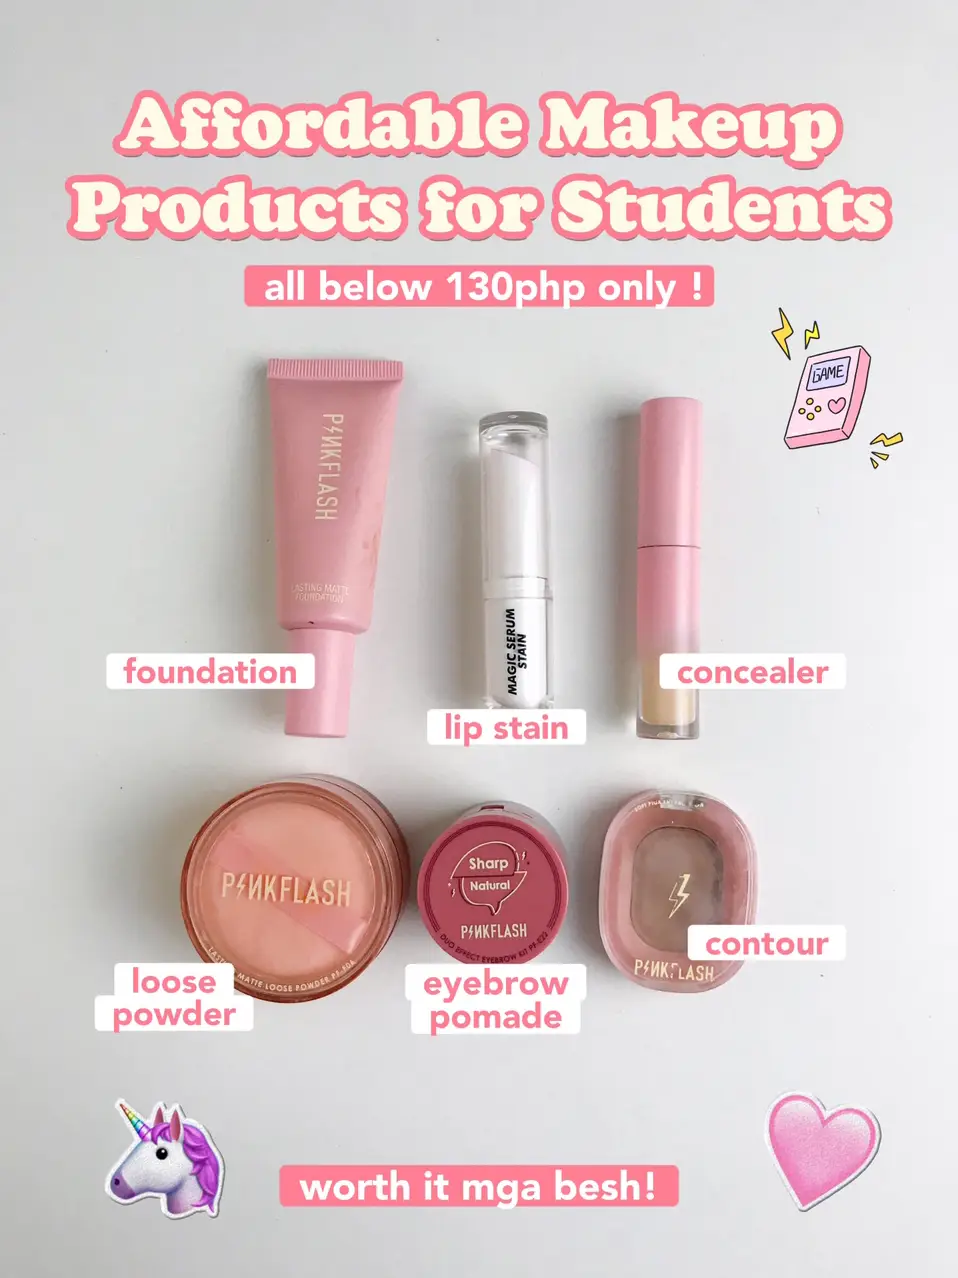 Sample products for students